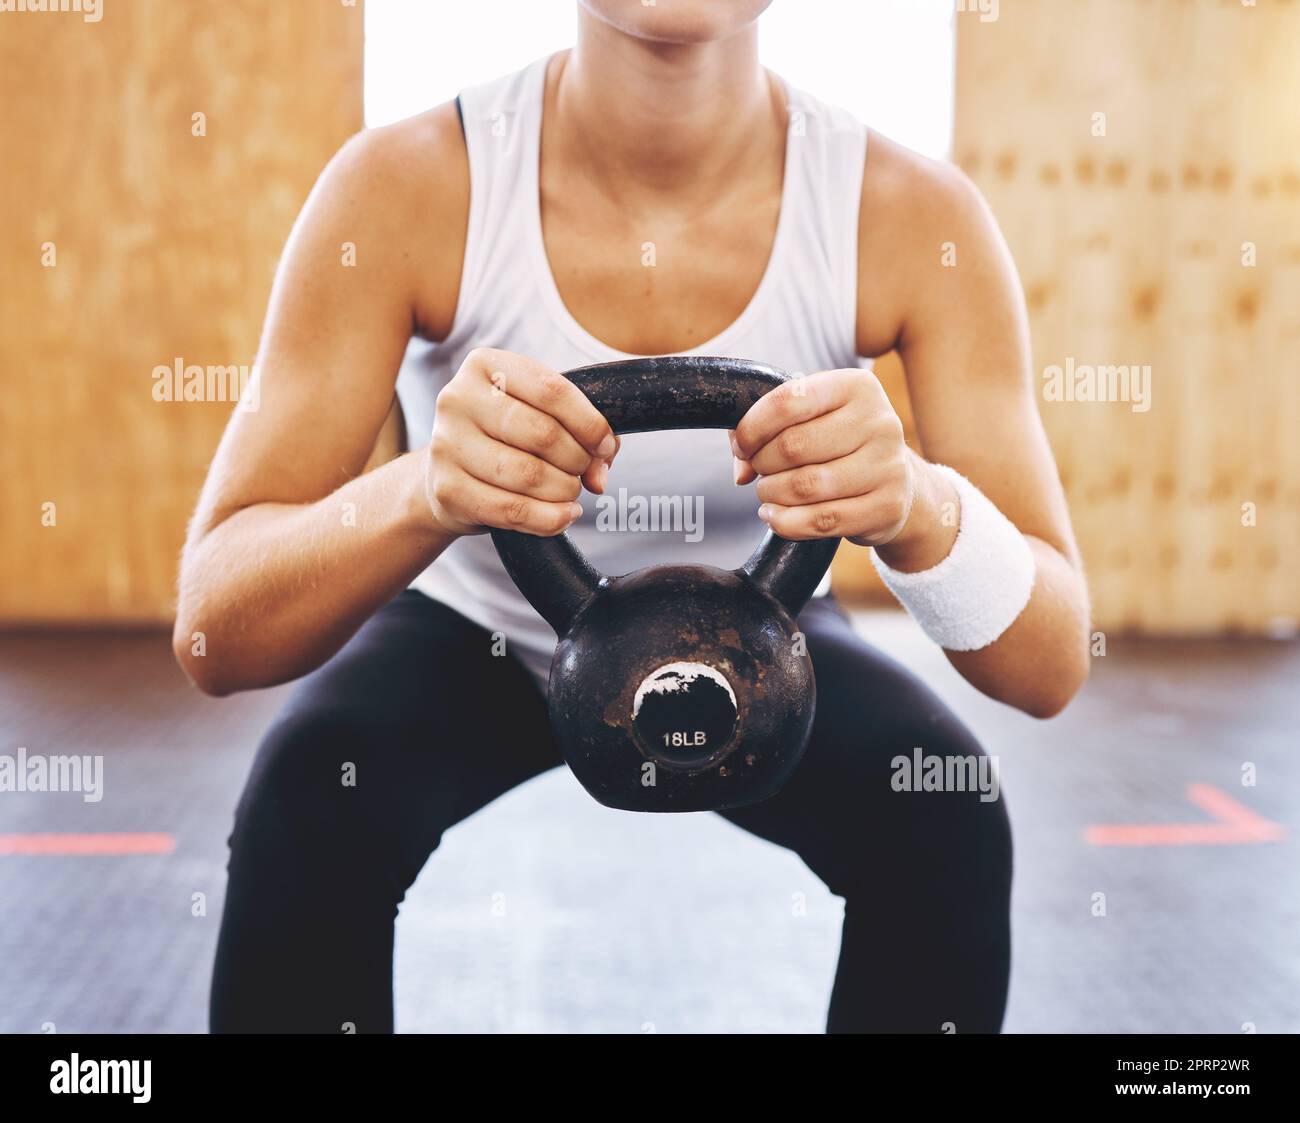 Health, energy and training with athlete woman weightlifting with kettlebell at fitness center or gym. Strong female doing power exercise and endurance workout for bodybuilding and muscle strength Stock Photo